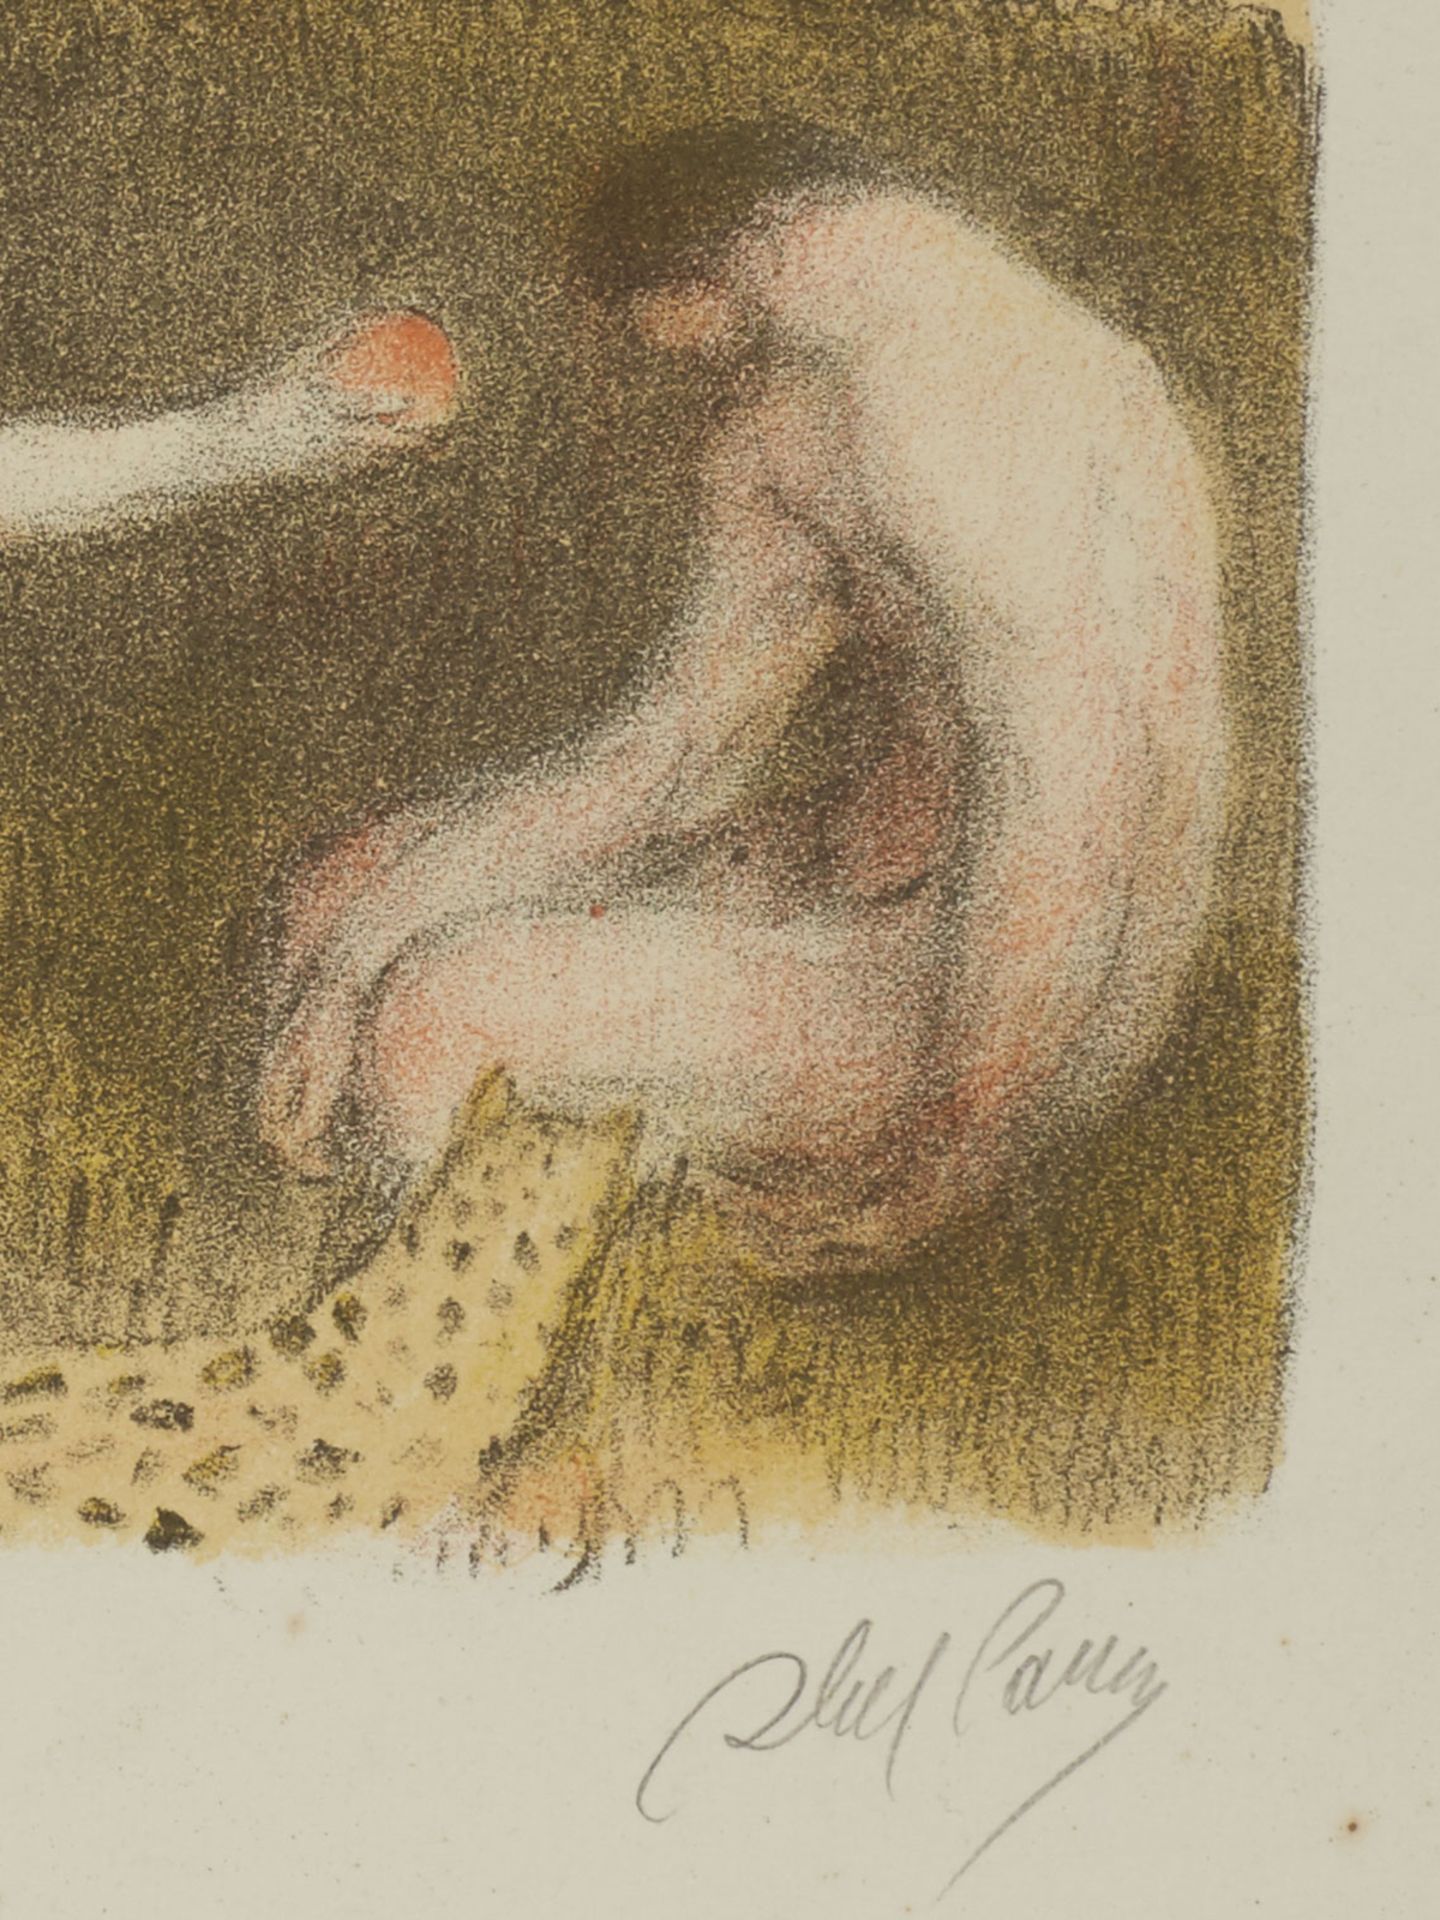 HANDMADE PRINT OF ADAM AND EVE, SIGNED PARRY, 20TH C. - Image 4 of 7